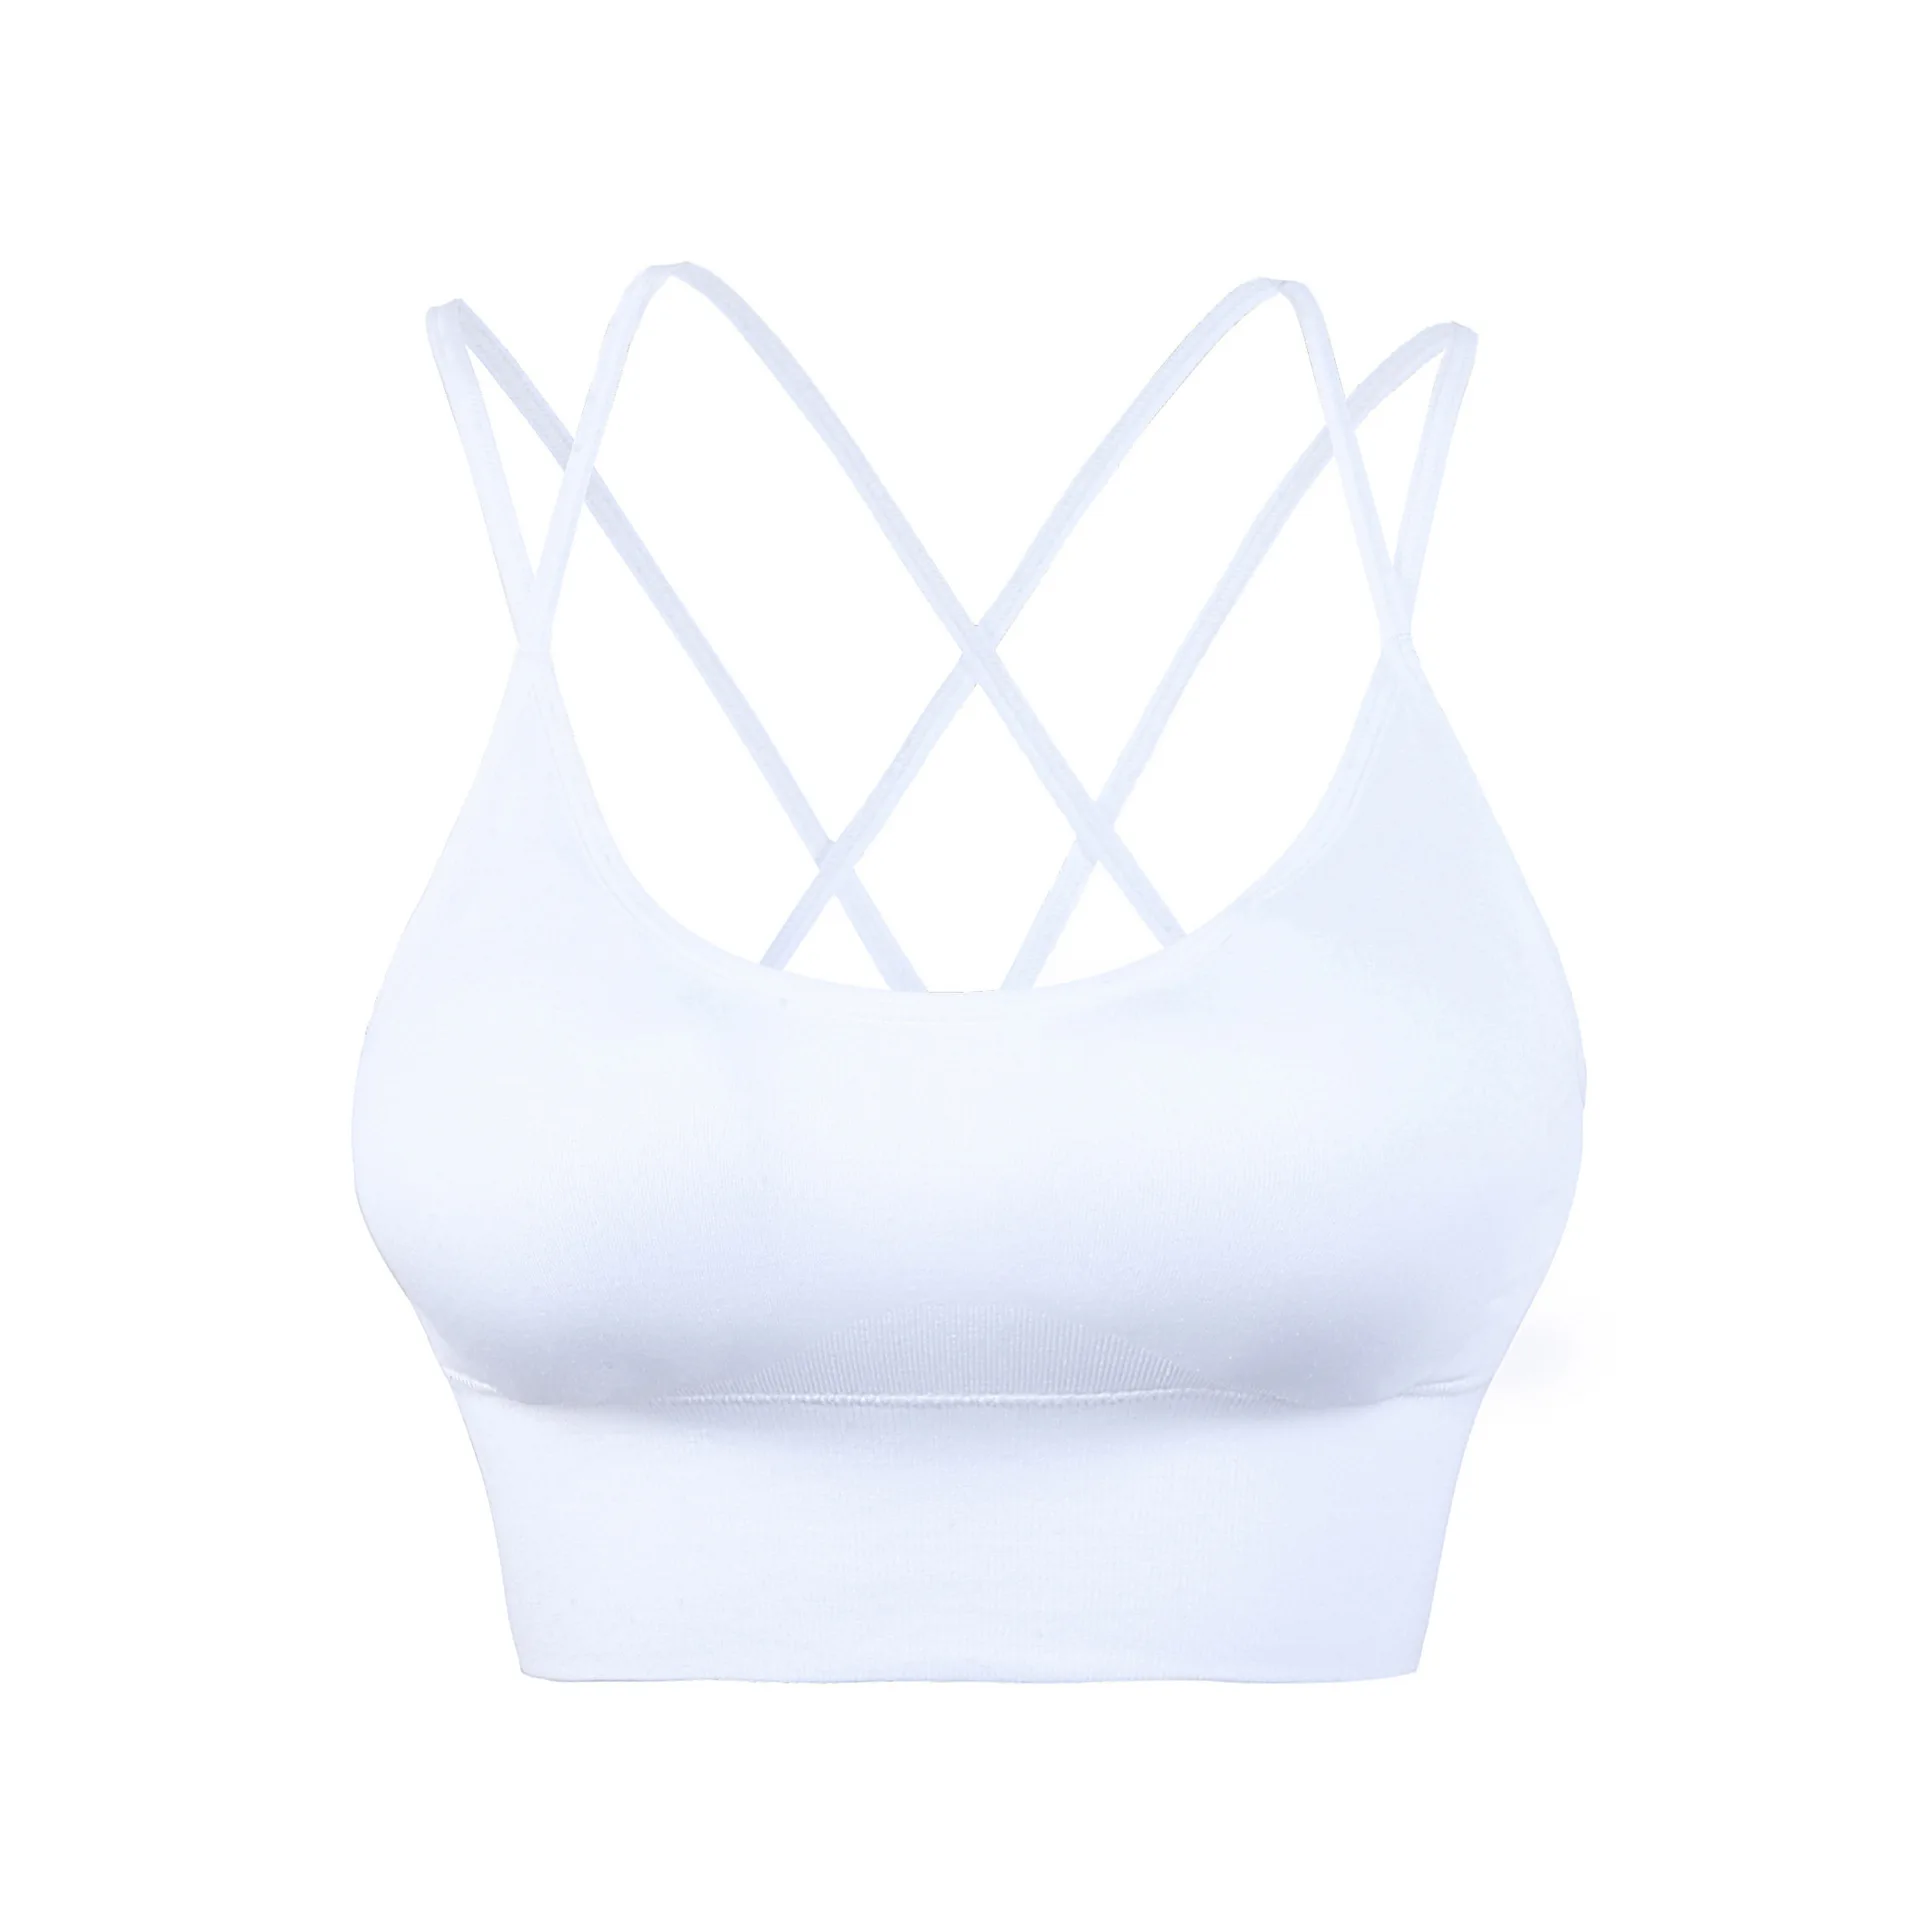 White Sport Bra Strappy Sports Bras For Women Sexy Crisscross Back Medium  Support Yoga Lingerie Removable Cups Bust Push Up - Bra & Brief Sets -  AliExpress